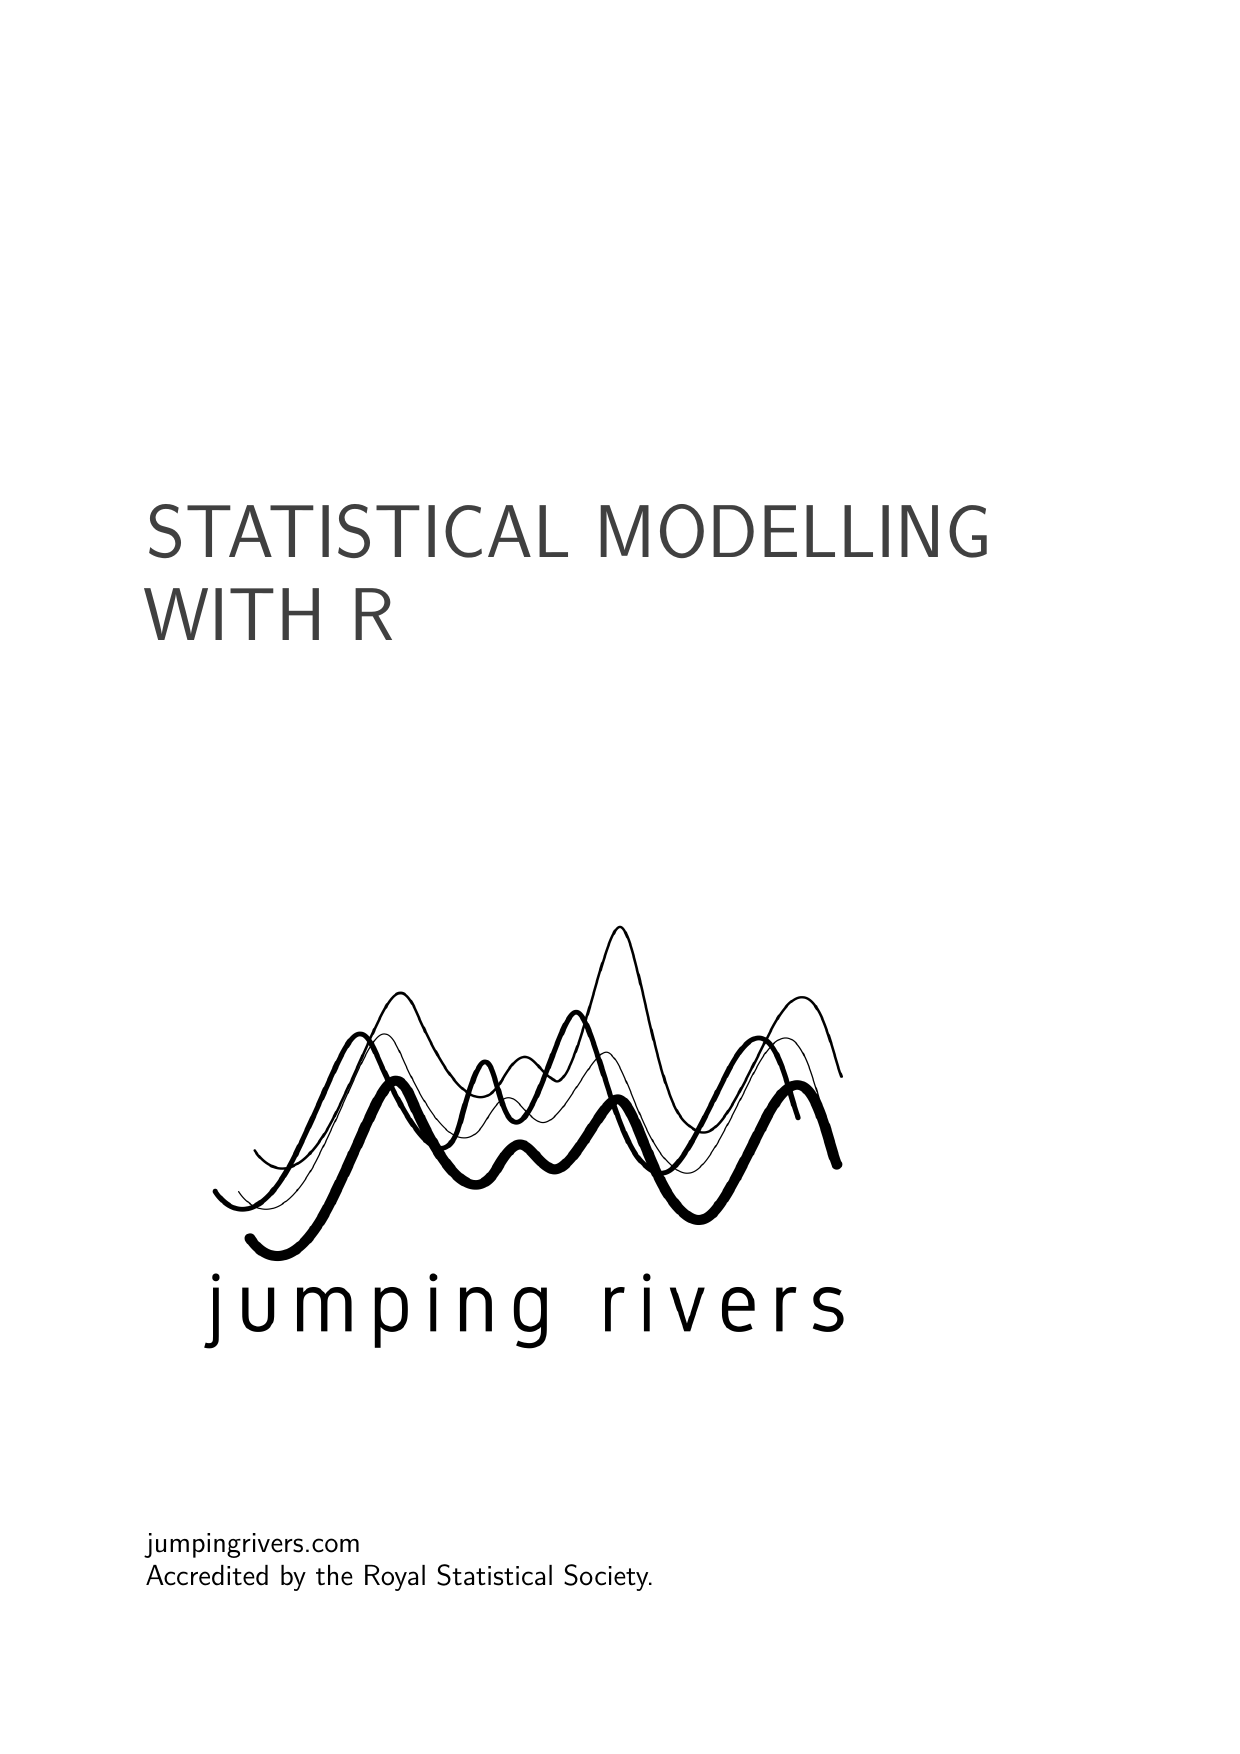 Example course material for 'Statistical Modelling with R'